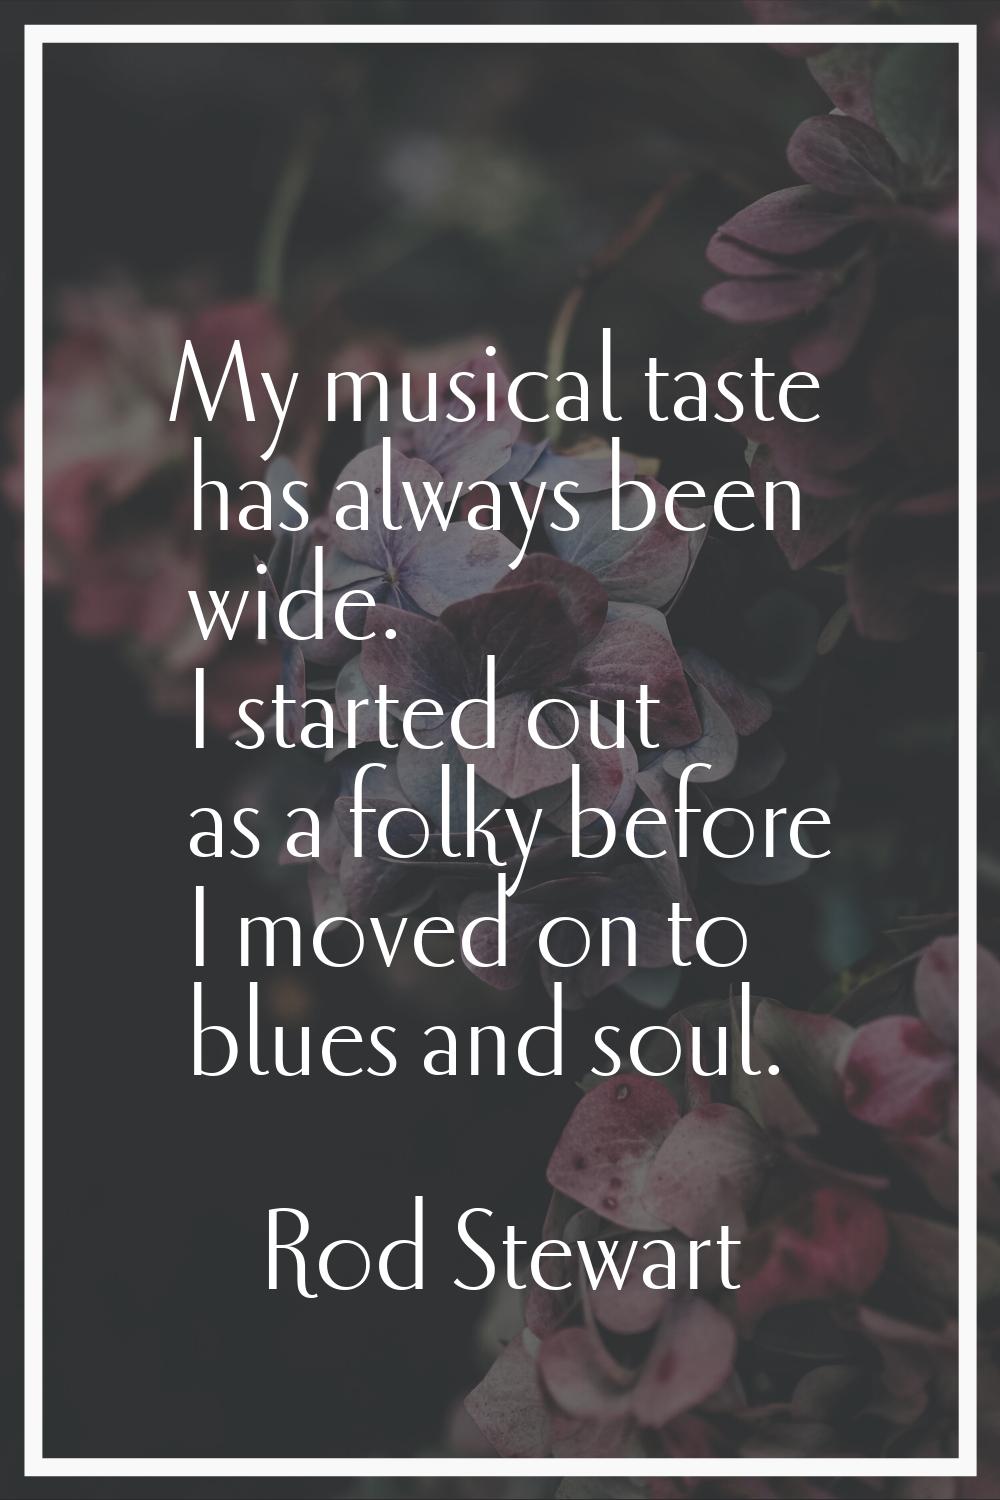 My musical taste has always been wide. I started out as a folky before I moved on to blues and soul